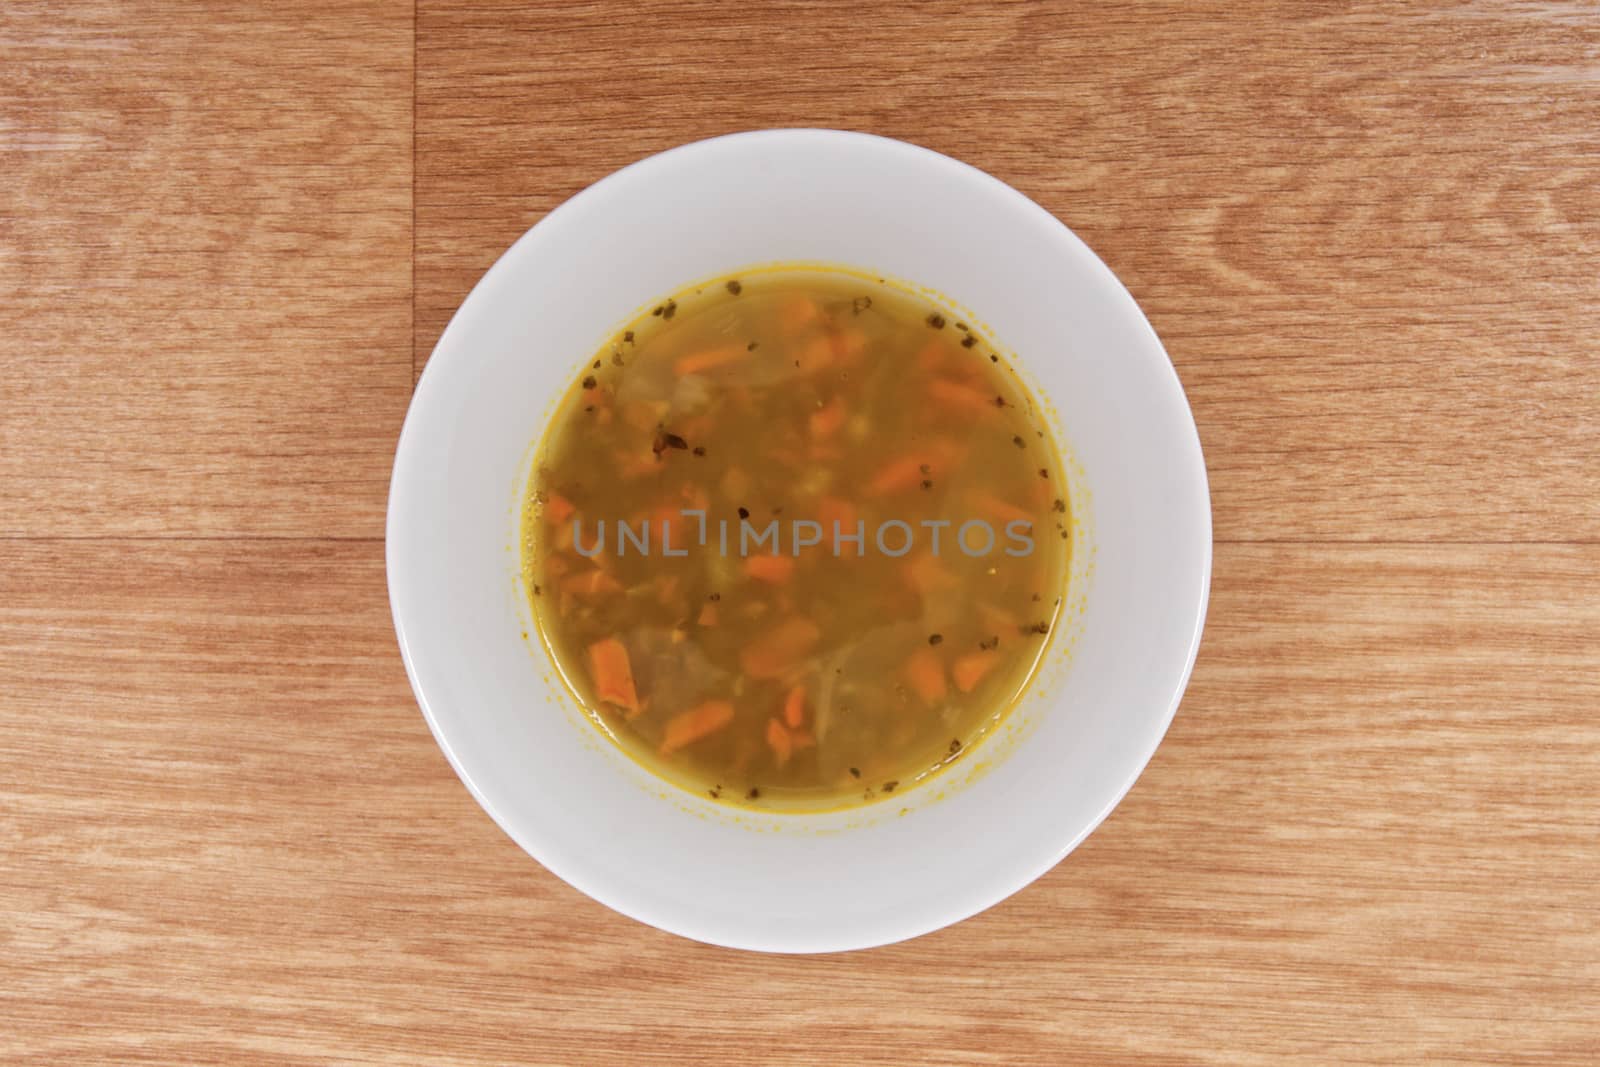 Lentil soup with carrots on a wooden table